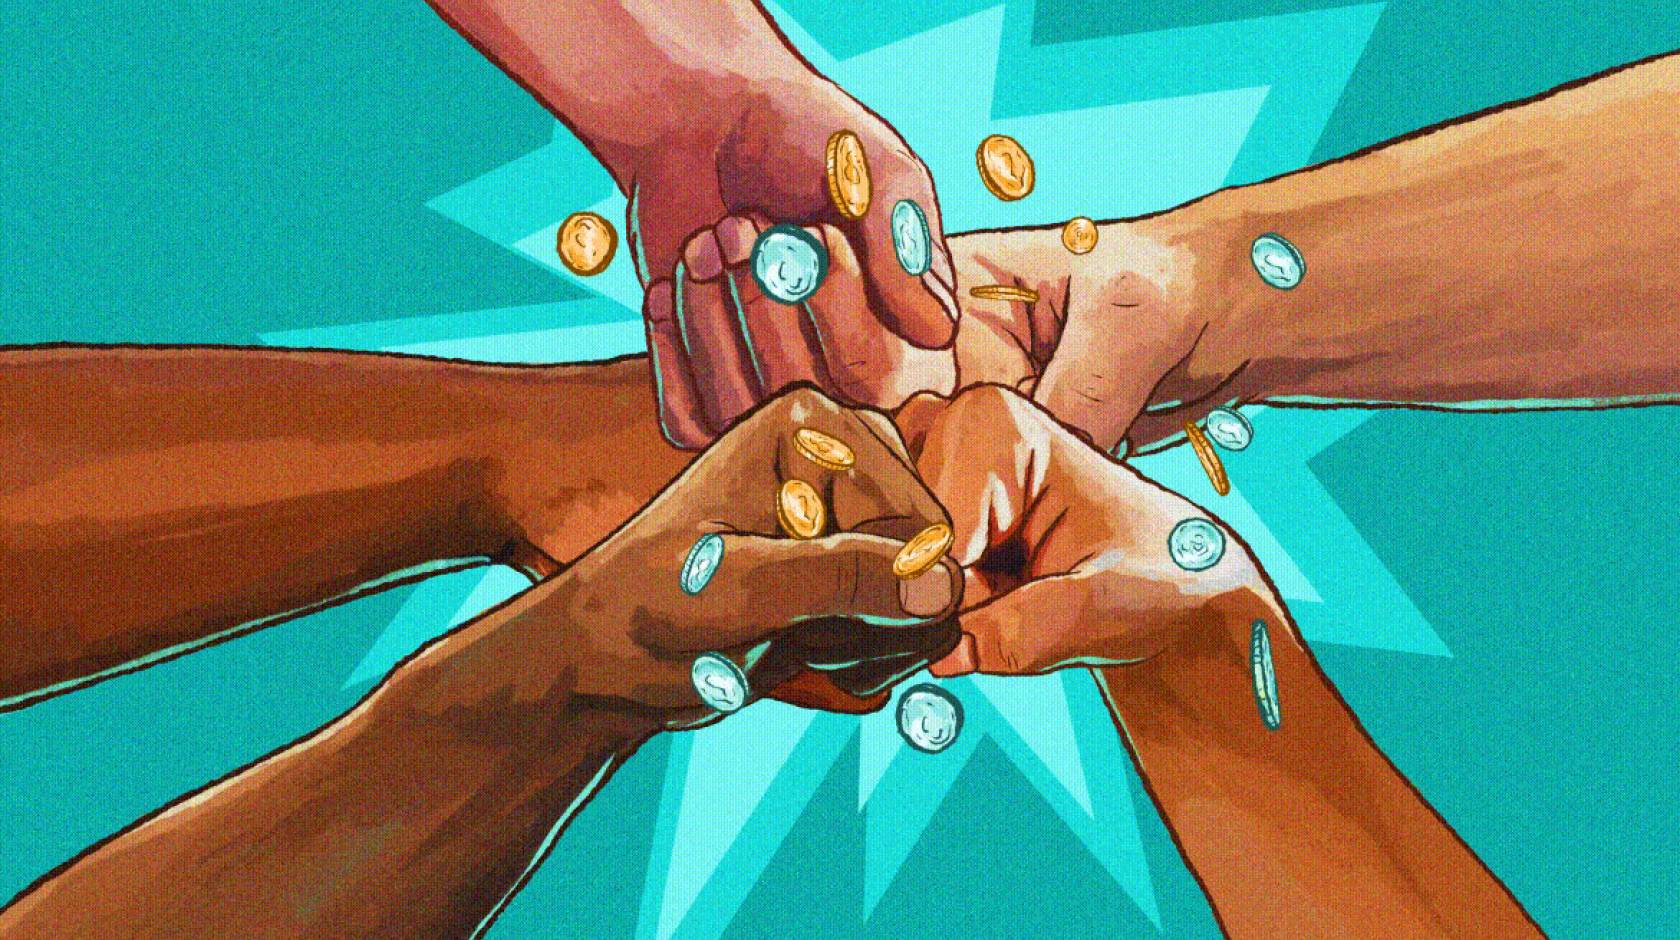 A still from an animation of fists from people of color fist-bumping with a cartoonish explosion and coins flying out